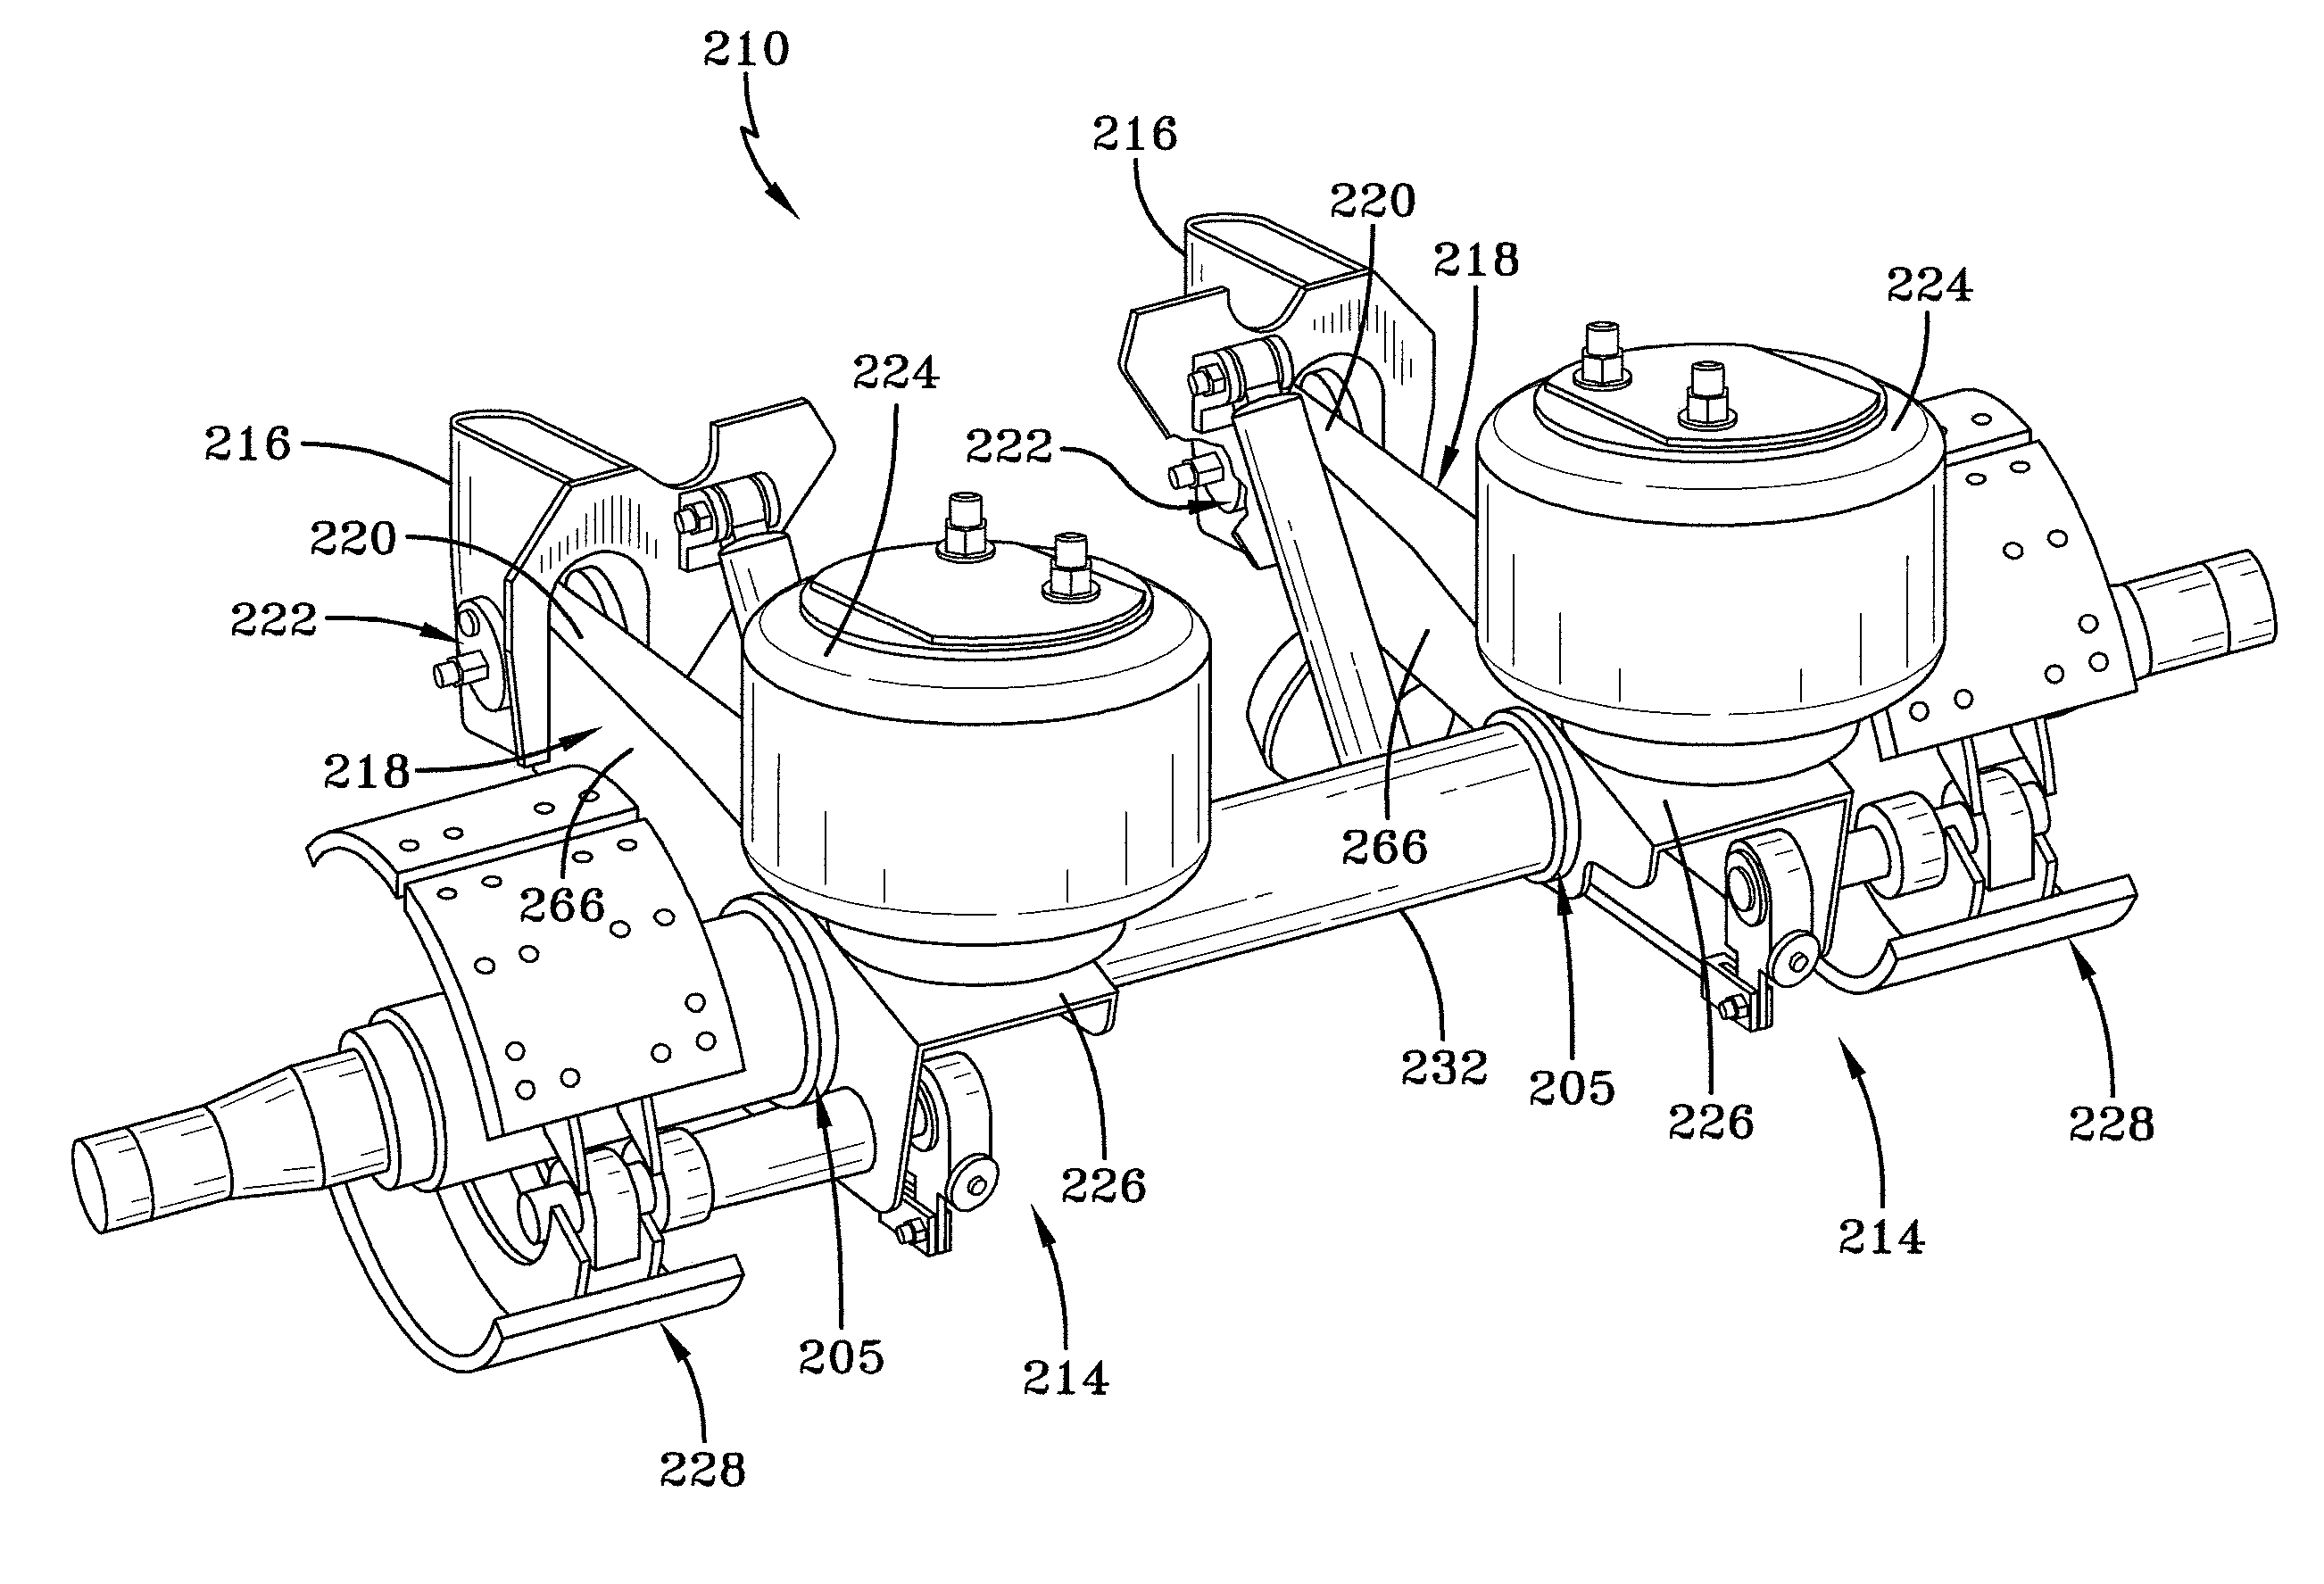 Heavy-duty vehicle axle-to-beam or crossbrace-to-beam connection